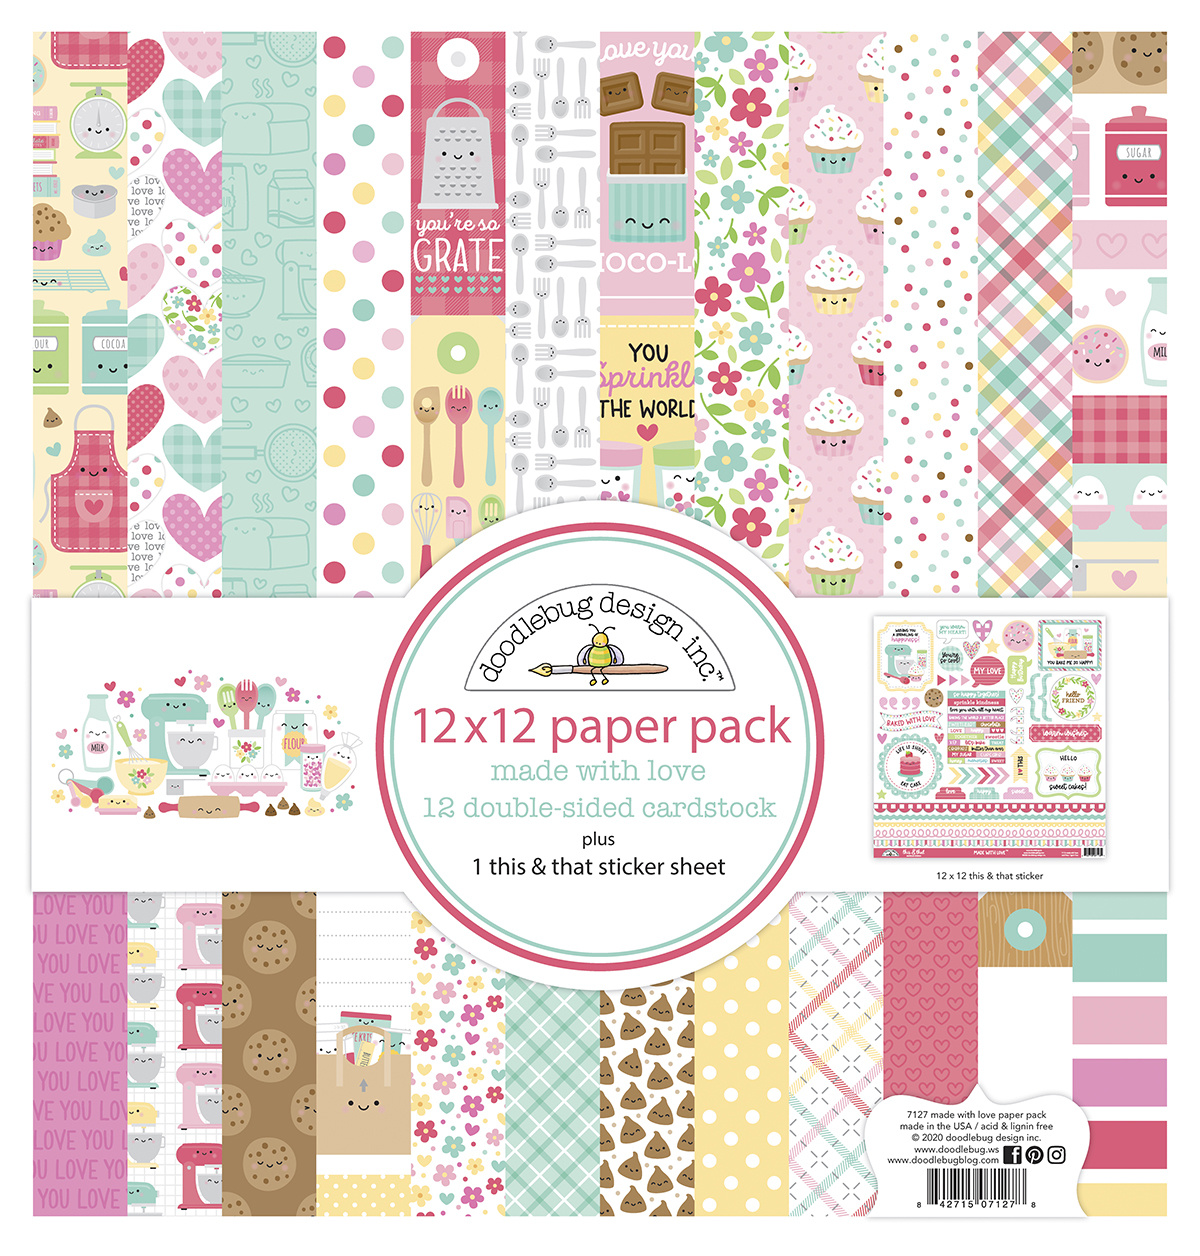 Doodlebug Design Made With Love 12x12 Inch Paper Pack (7127)